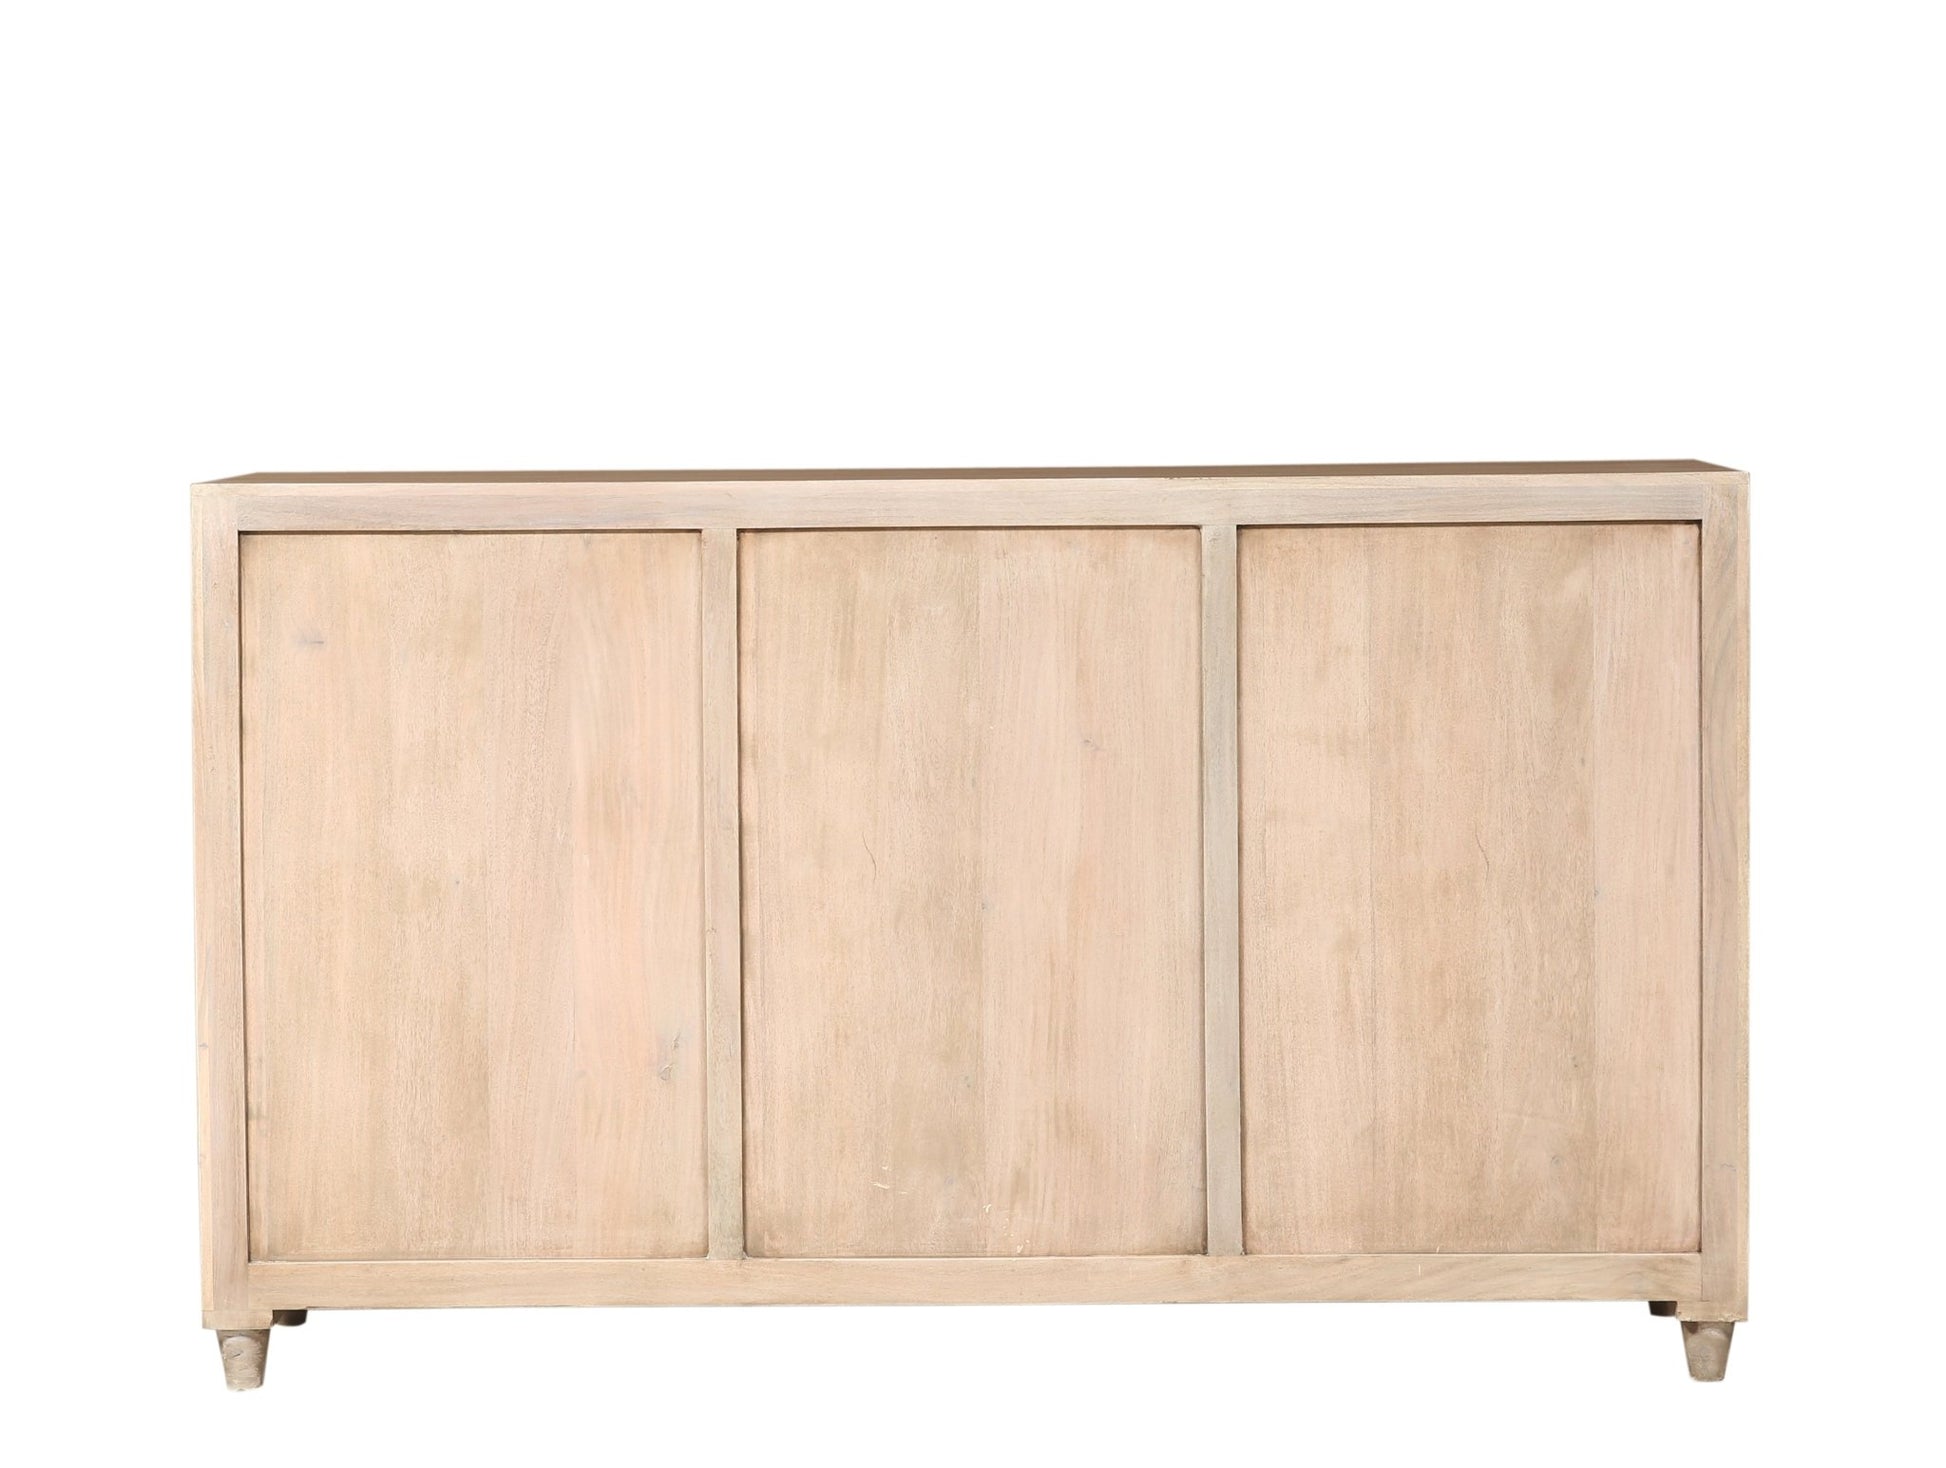 Dominique 71" 4 Door Sideboard - New White Wash - The Furnishery